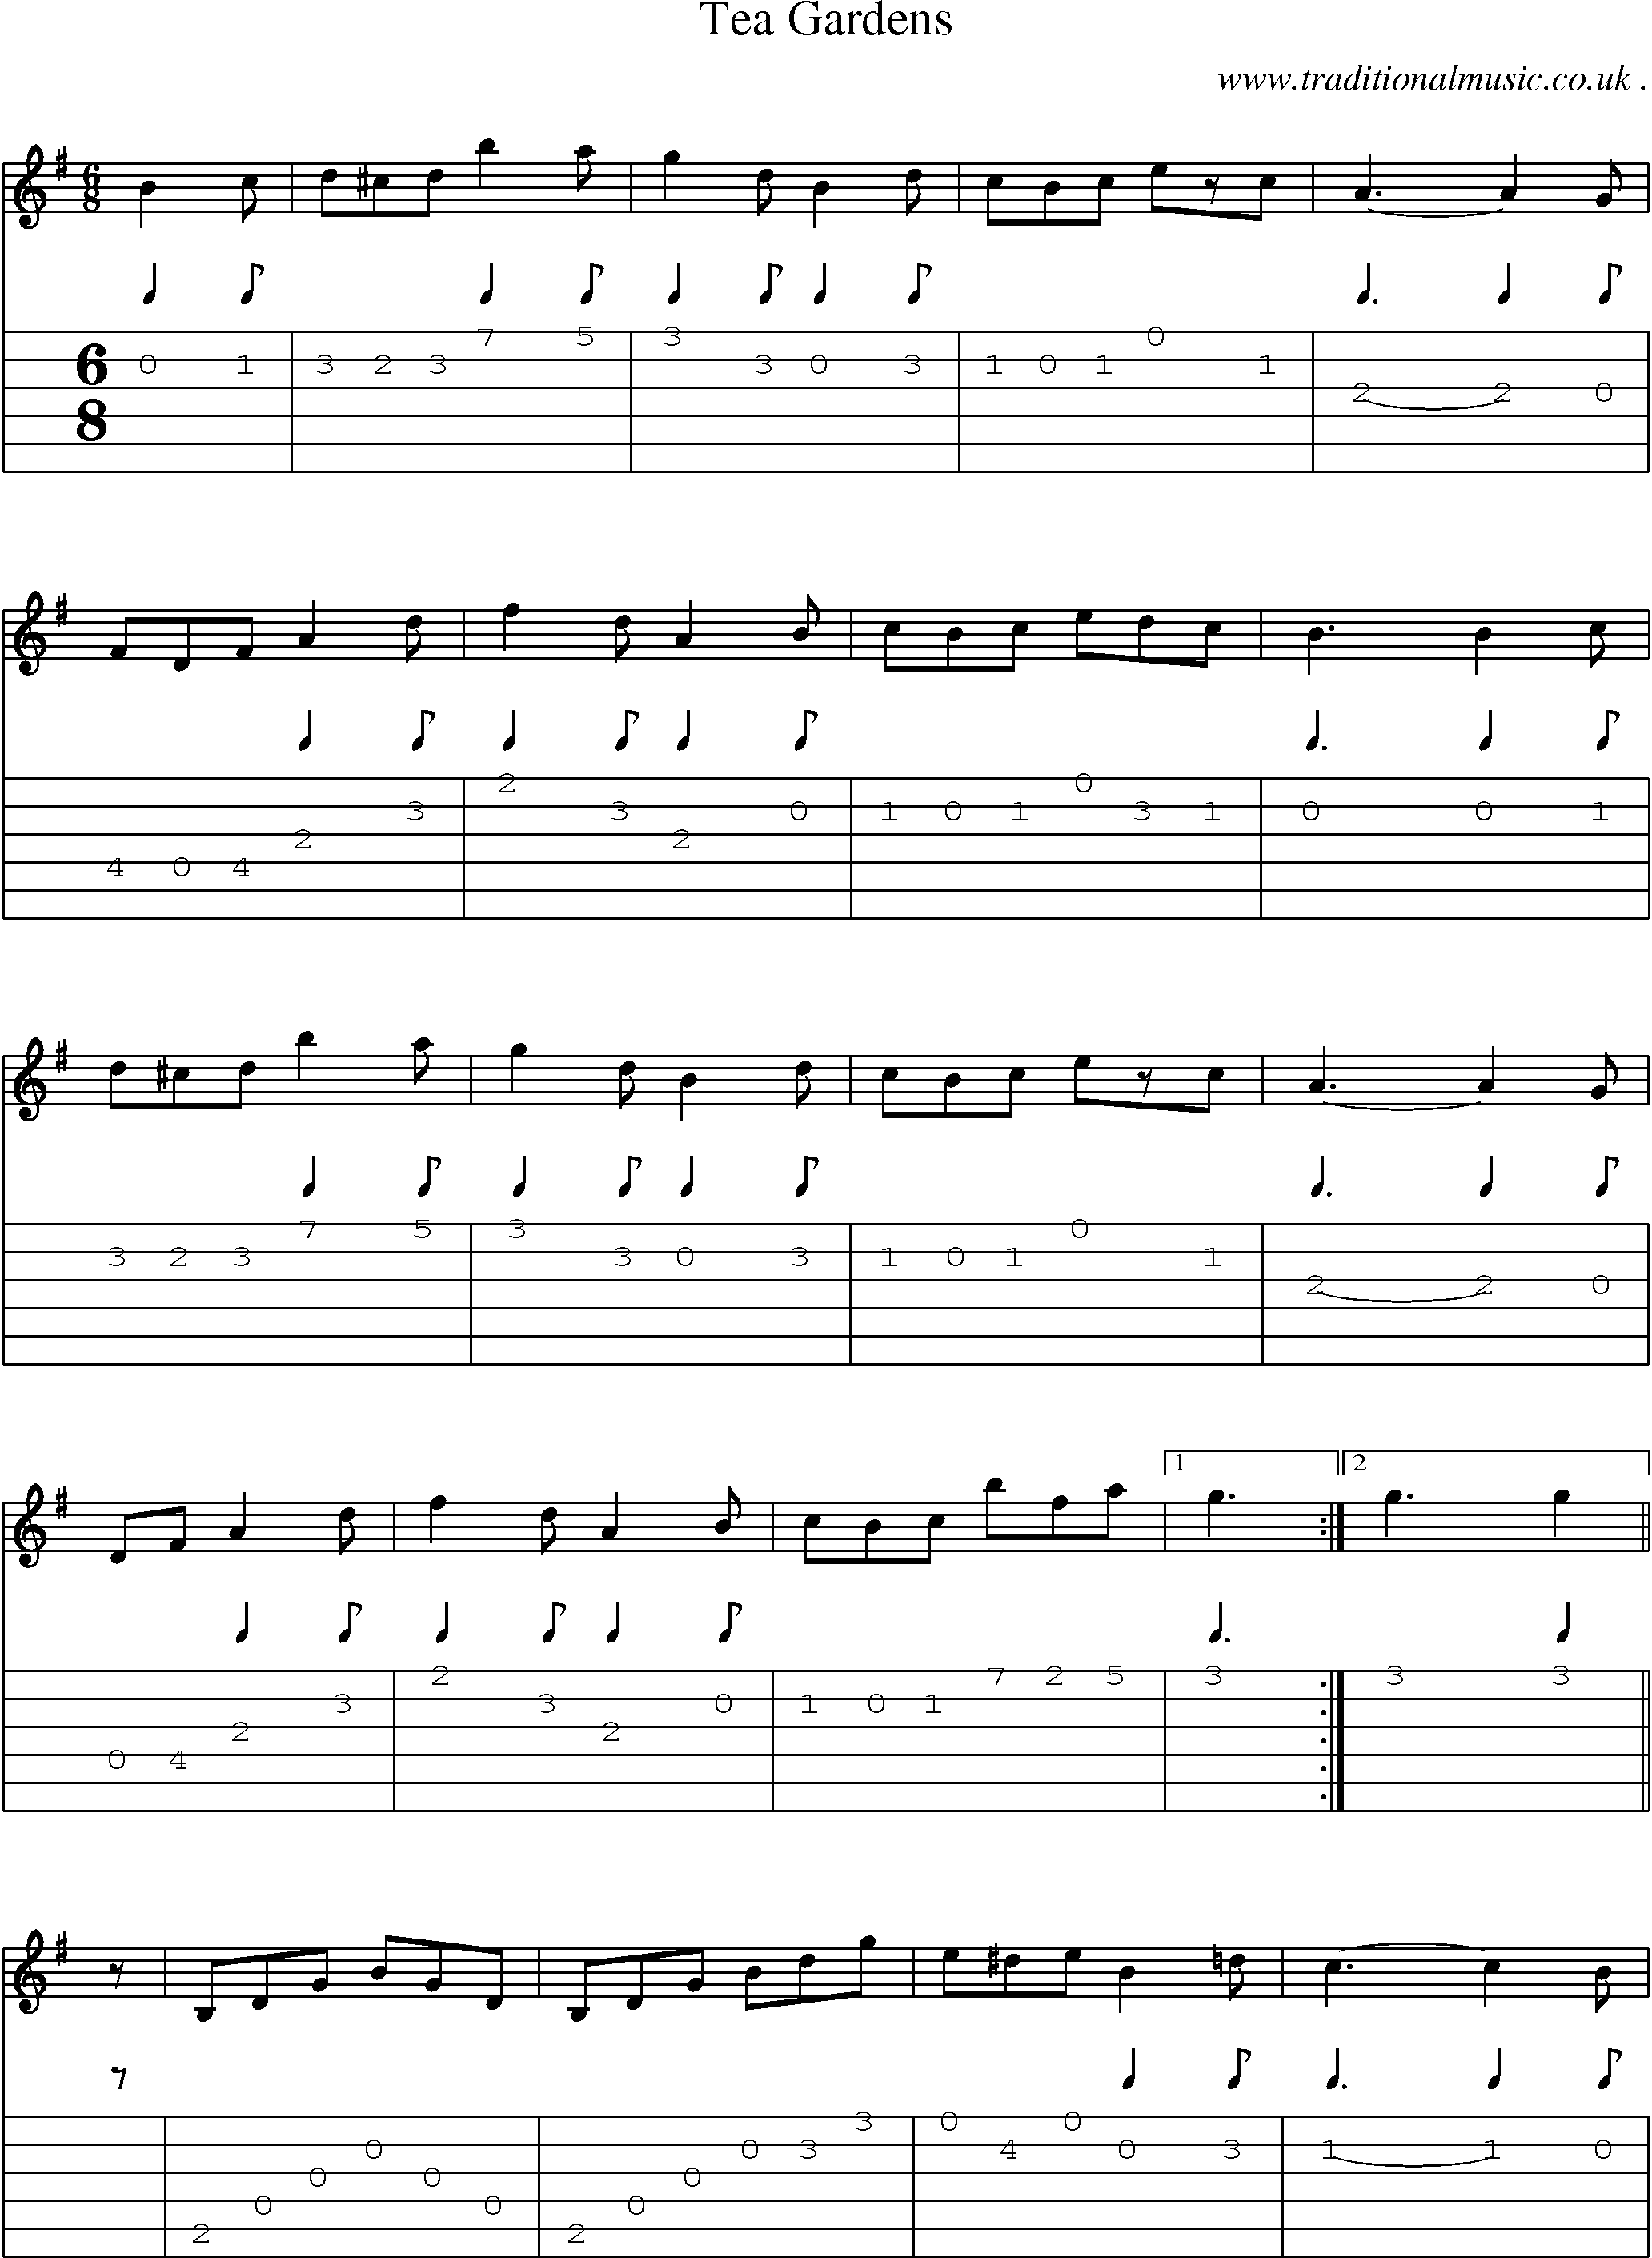 Sheet-music  score, Chords and Guitar Tabs for Tea Gardens